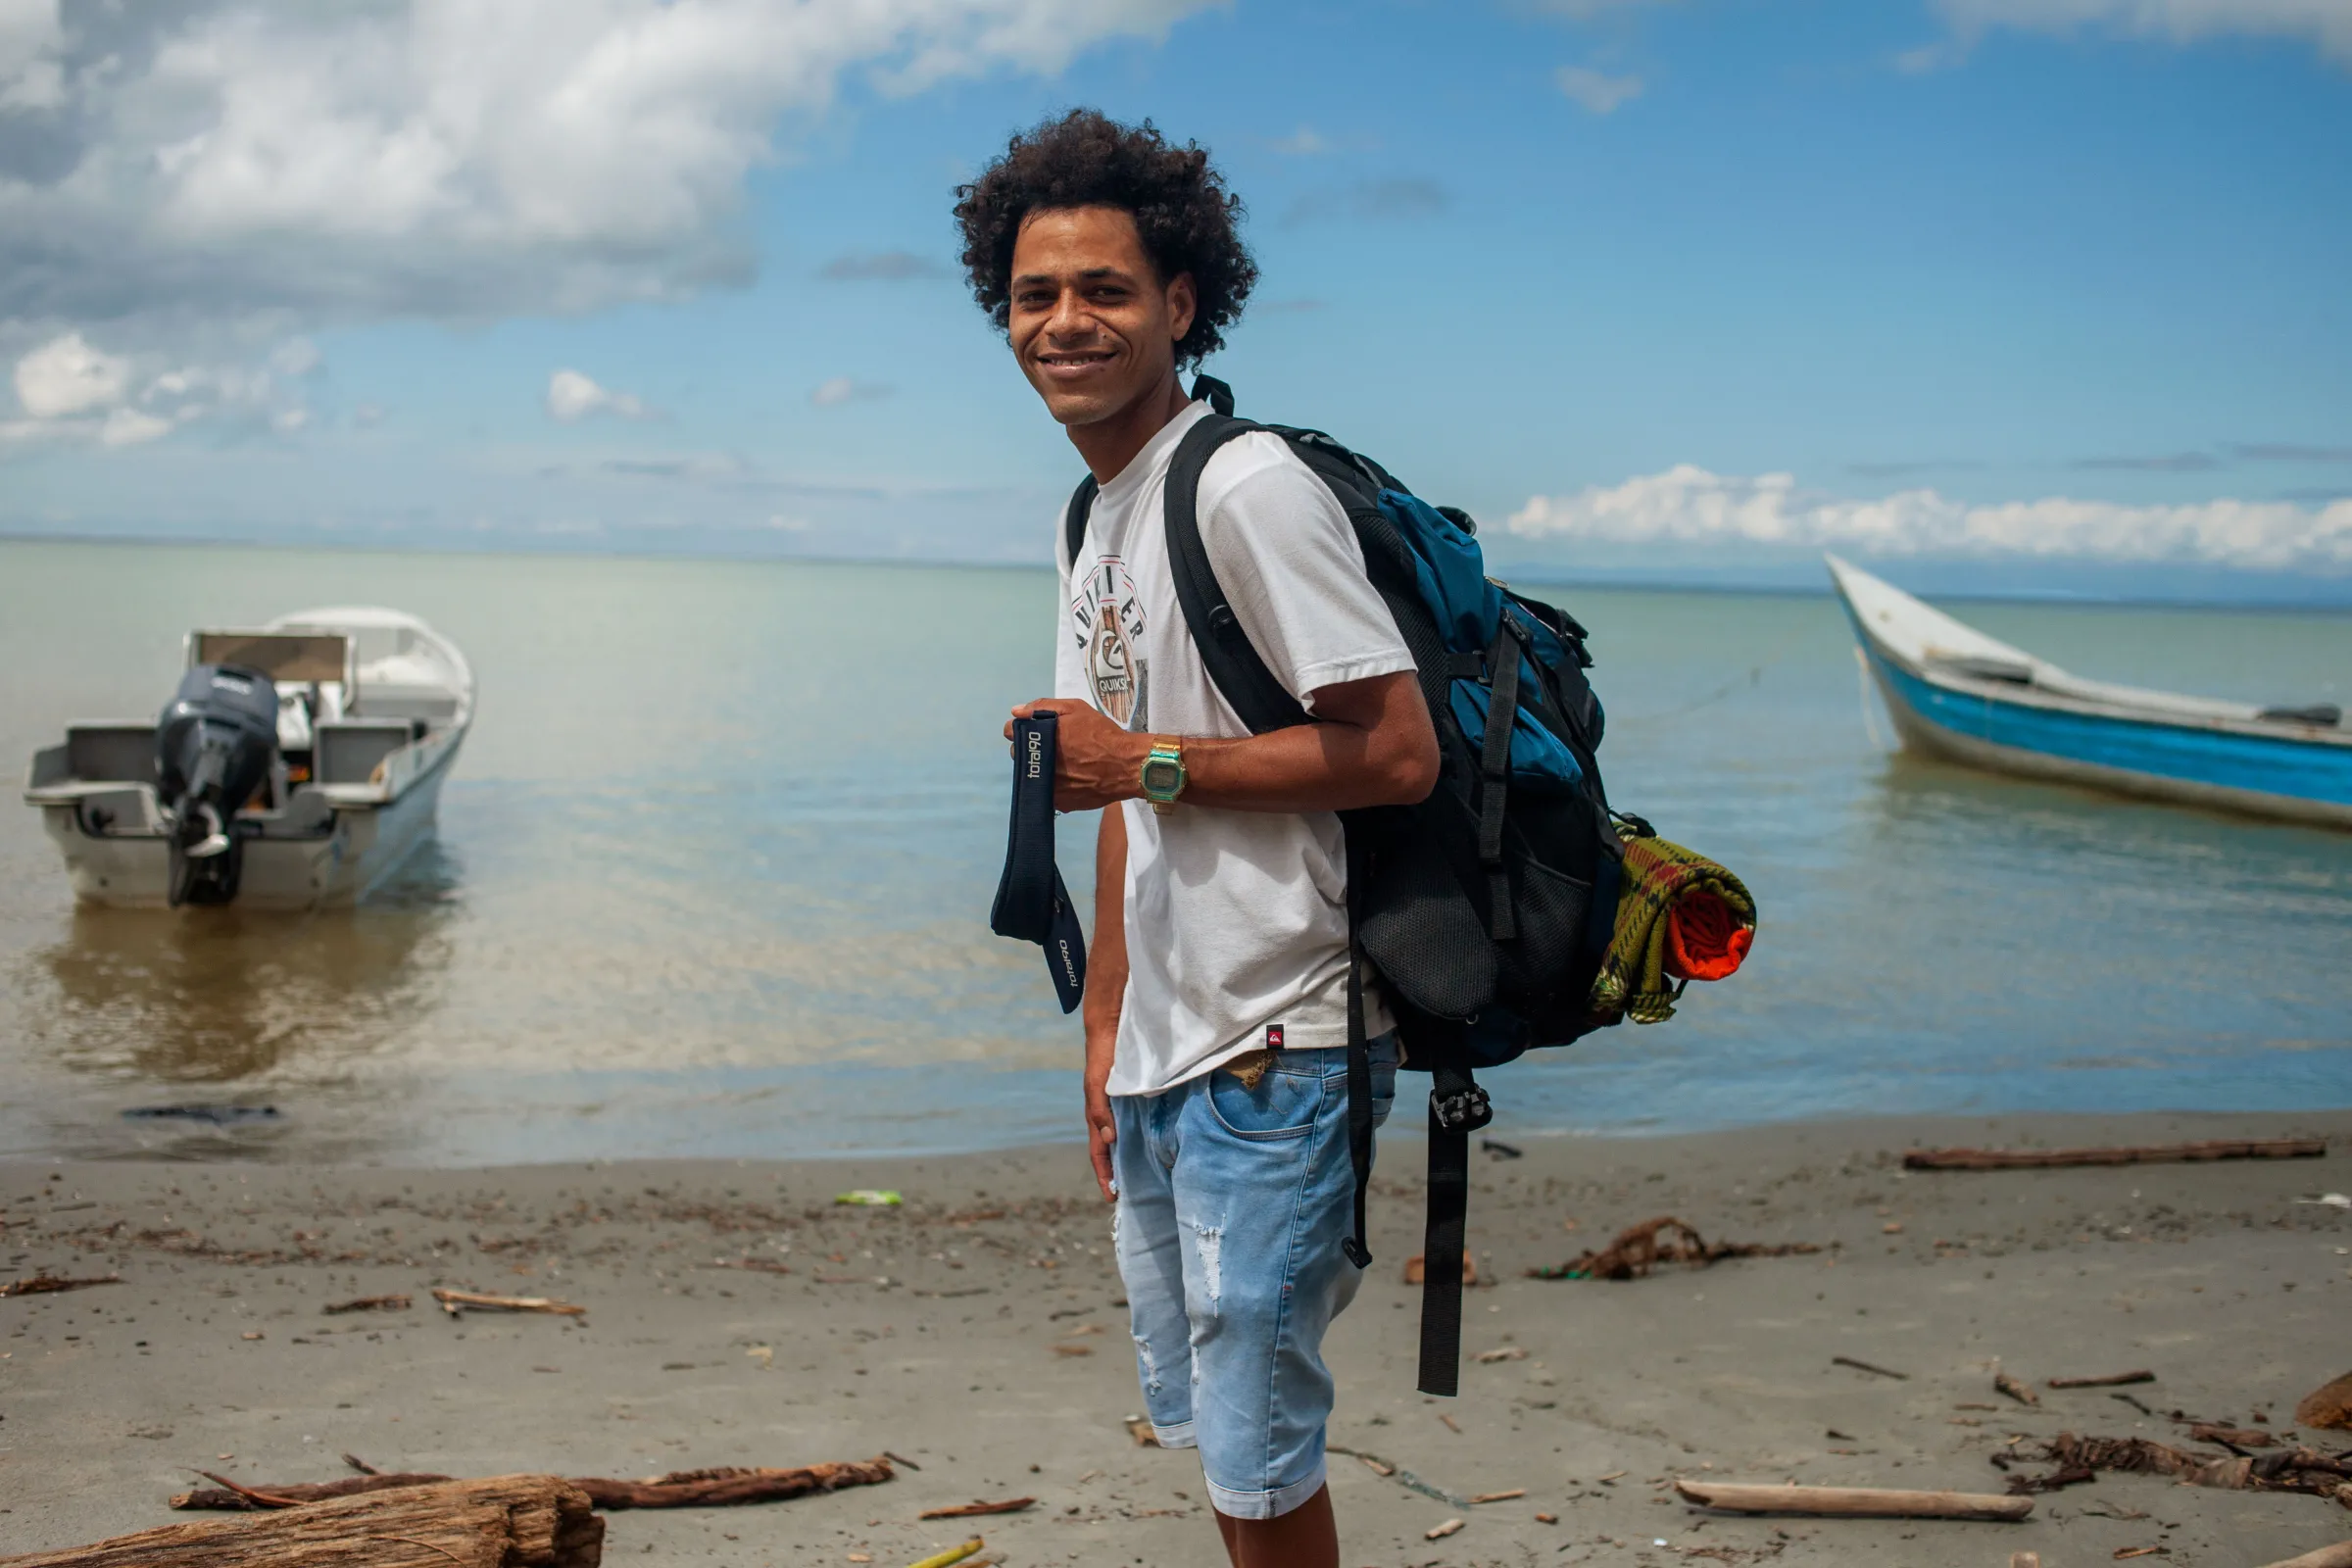 Douglas, a 31-year-old Venezuelan migrant traveling alone, poses for a photo on the beach in the Colombian town of Necocli before boarding a boat to Capurgana from where the jungle trek across the Darién Gap begins. Necocli, Colombia, July 29, 2022. Thomson Reuters Foundation/Fabio Cuttica